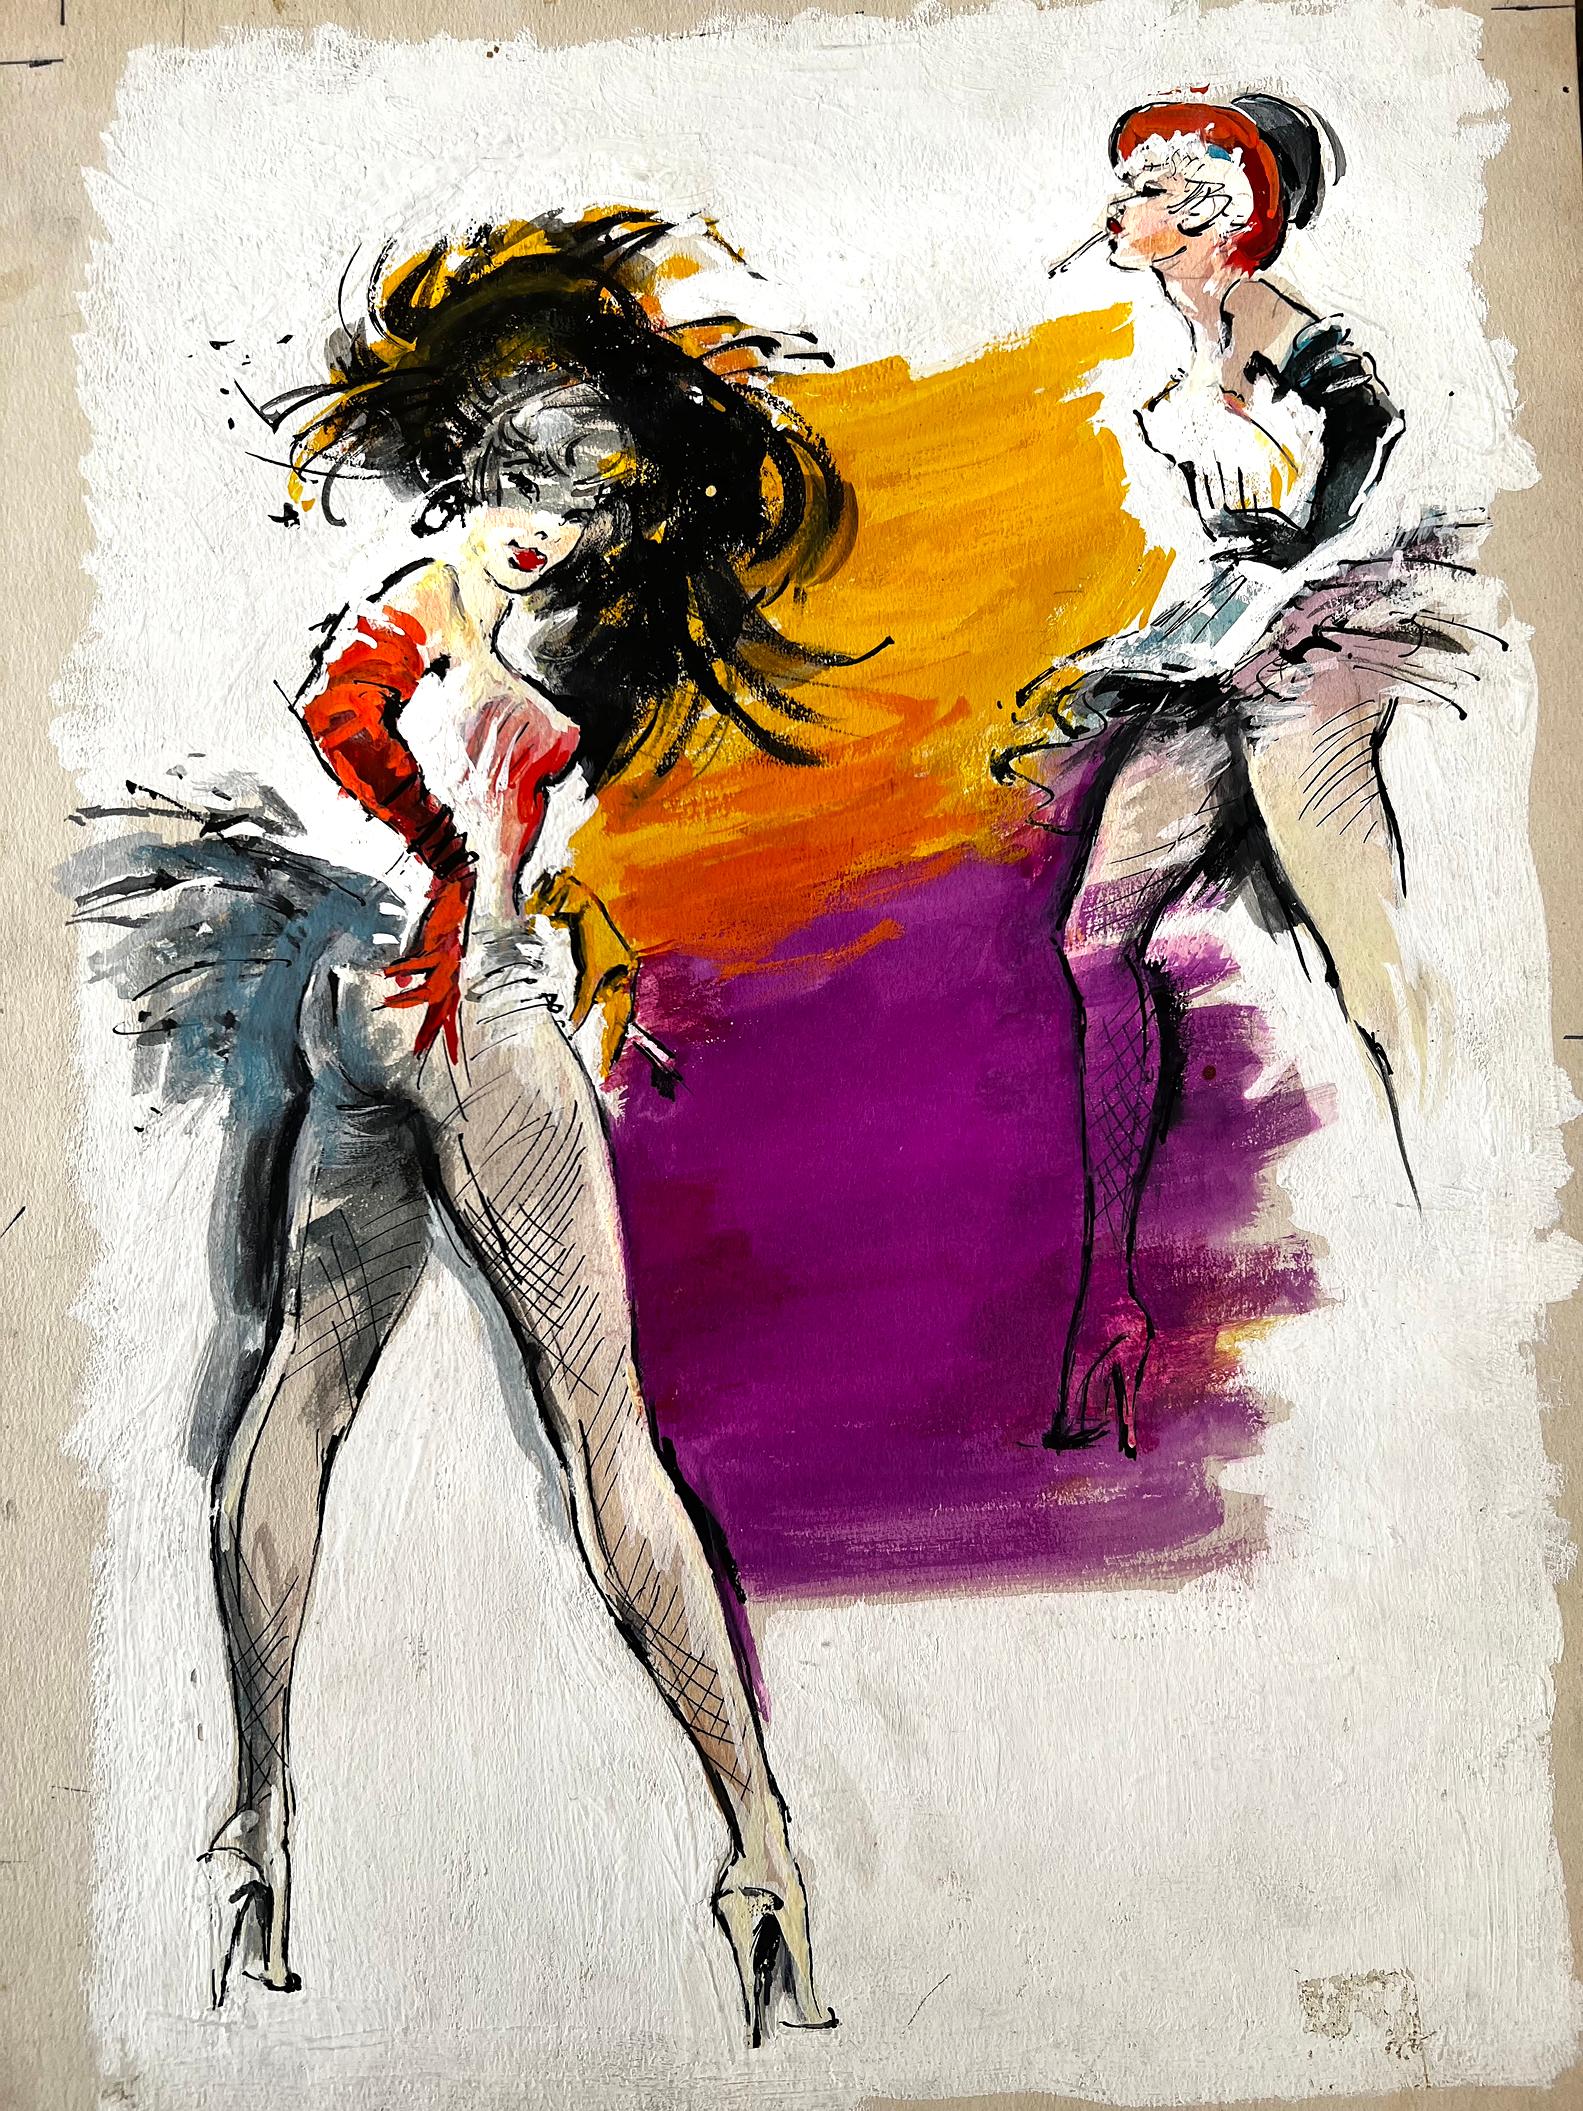 Sexy French Cabaret Dancers - Folies Bergere  Pulp Paperback Book Cover - Painting by George Ziel